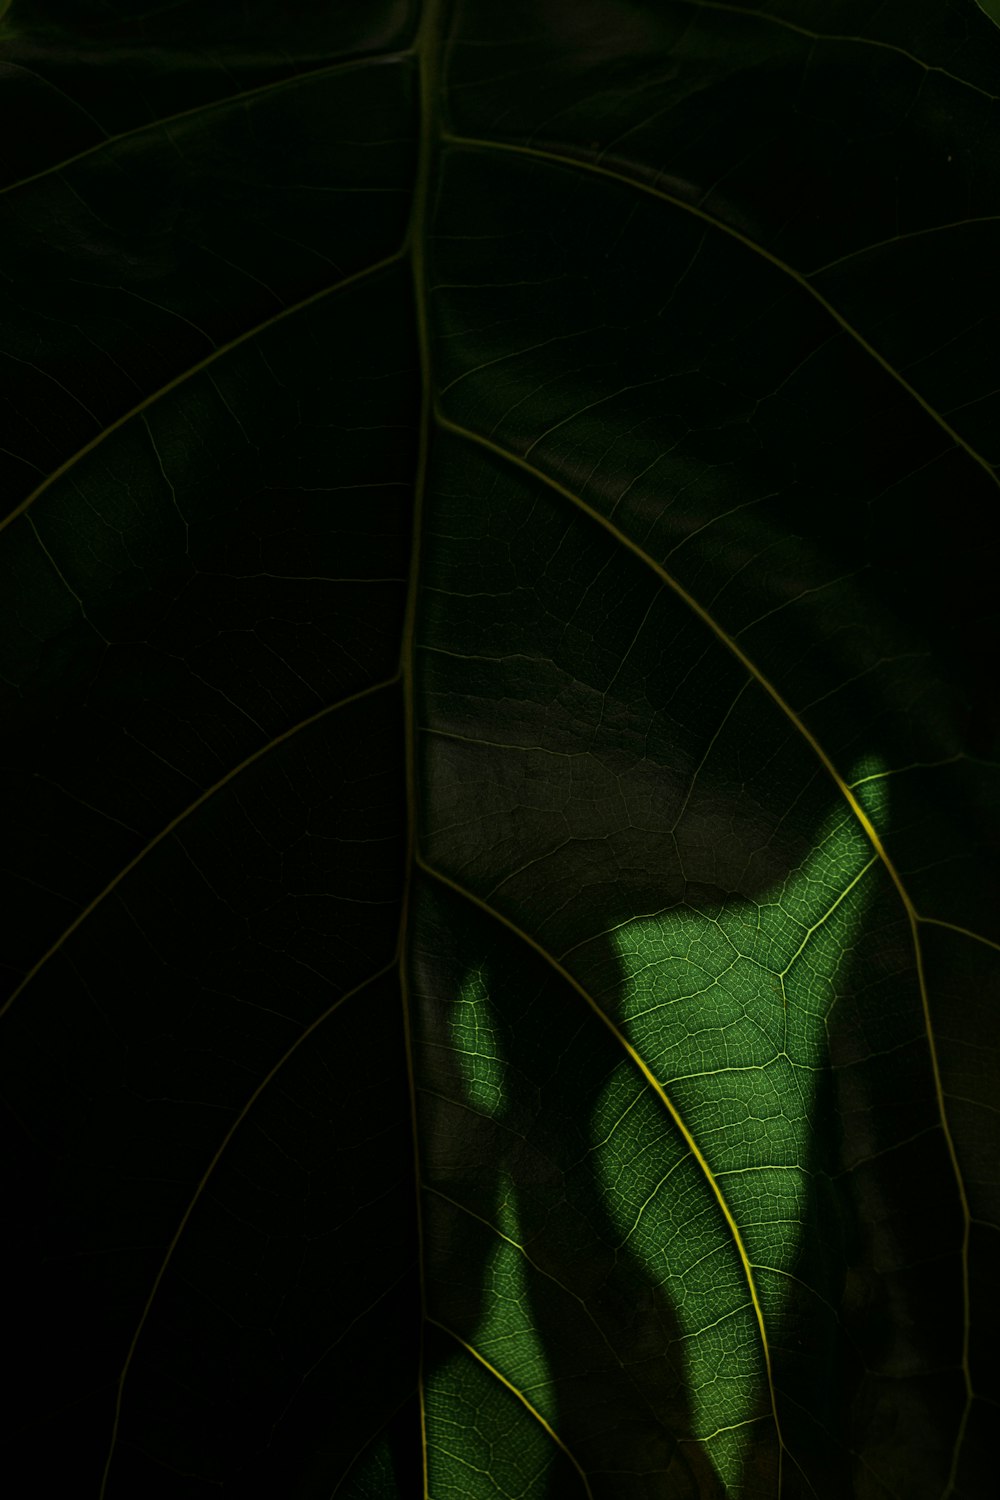 the shadow of a person on a large leaf